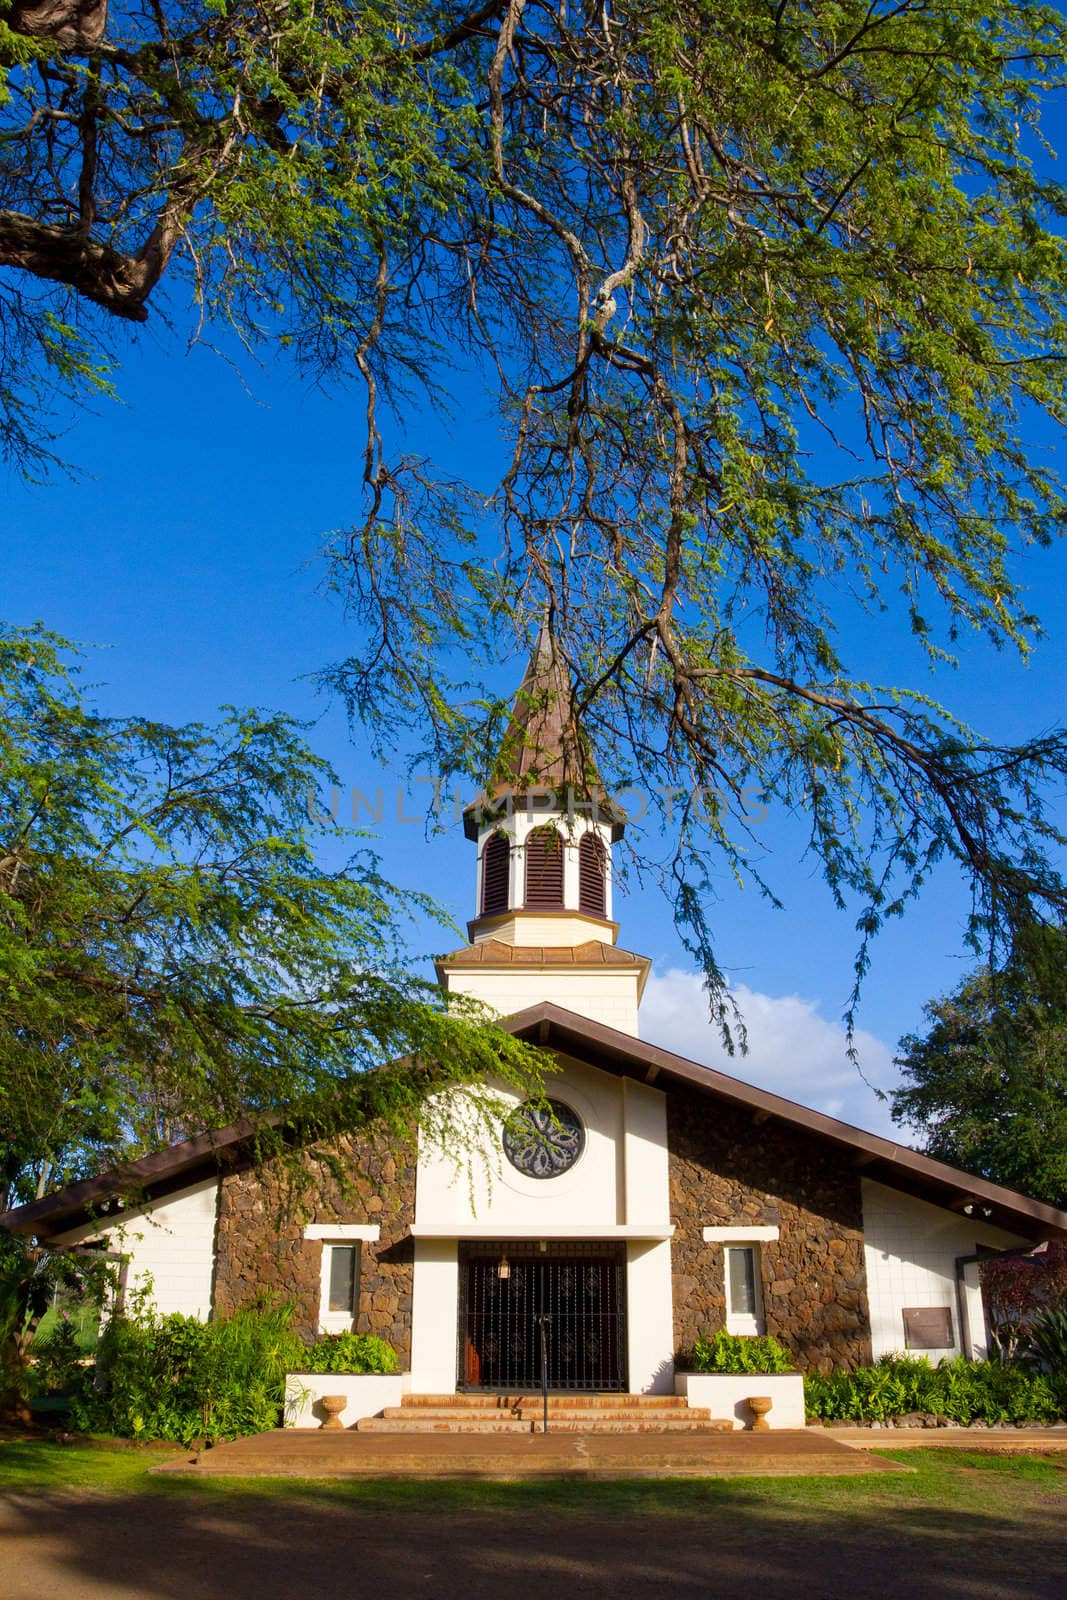 A beautiful old church in Haleiwa Oahu Hawaii exists among the tropical plant life and blue sky.